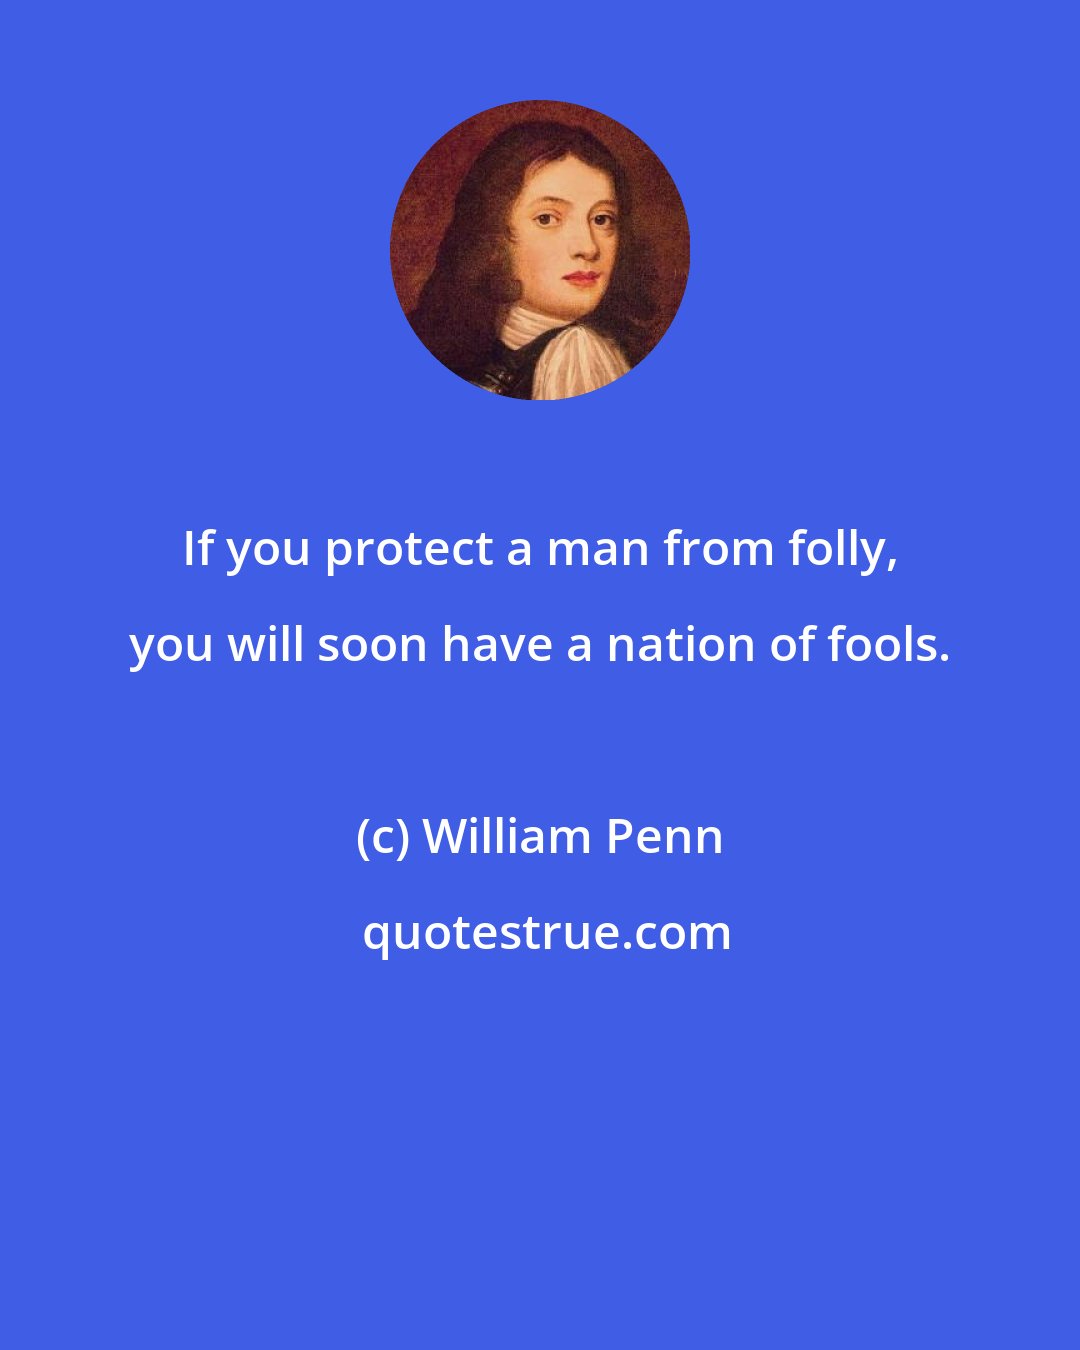 William Penn: If you protect a man from folly, you will soon have a nation of fools.